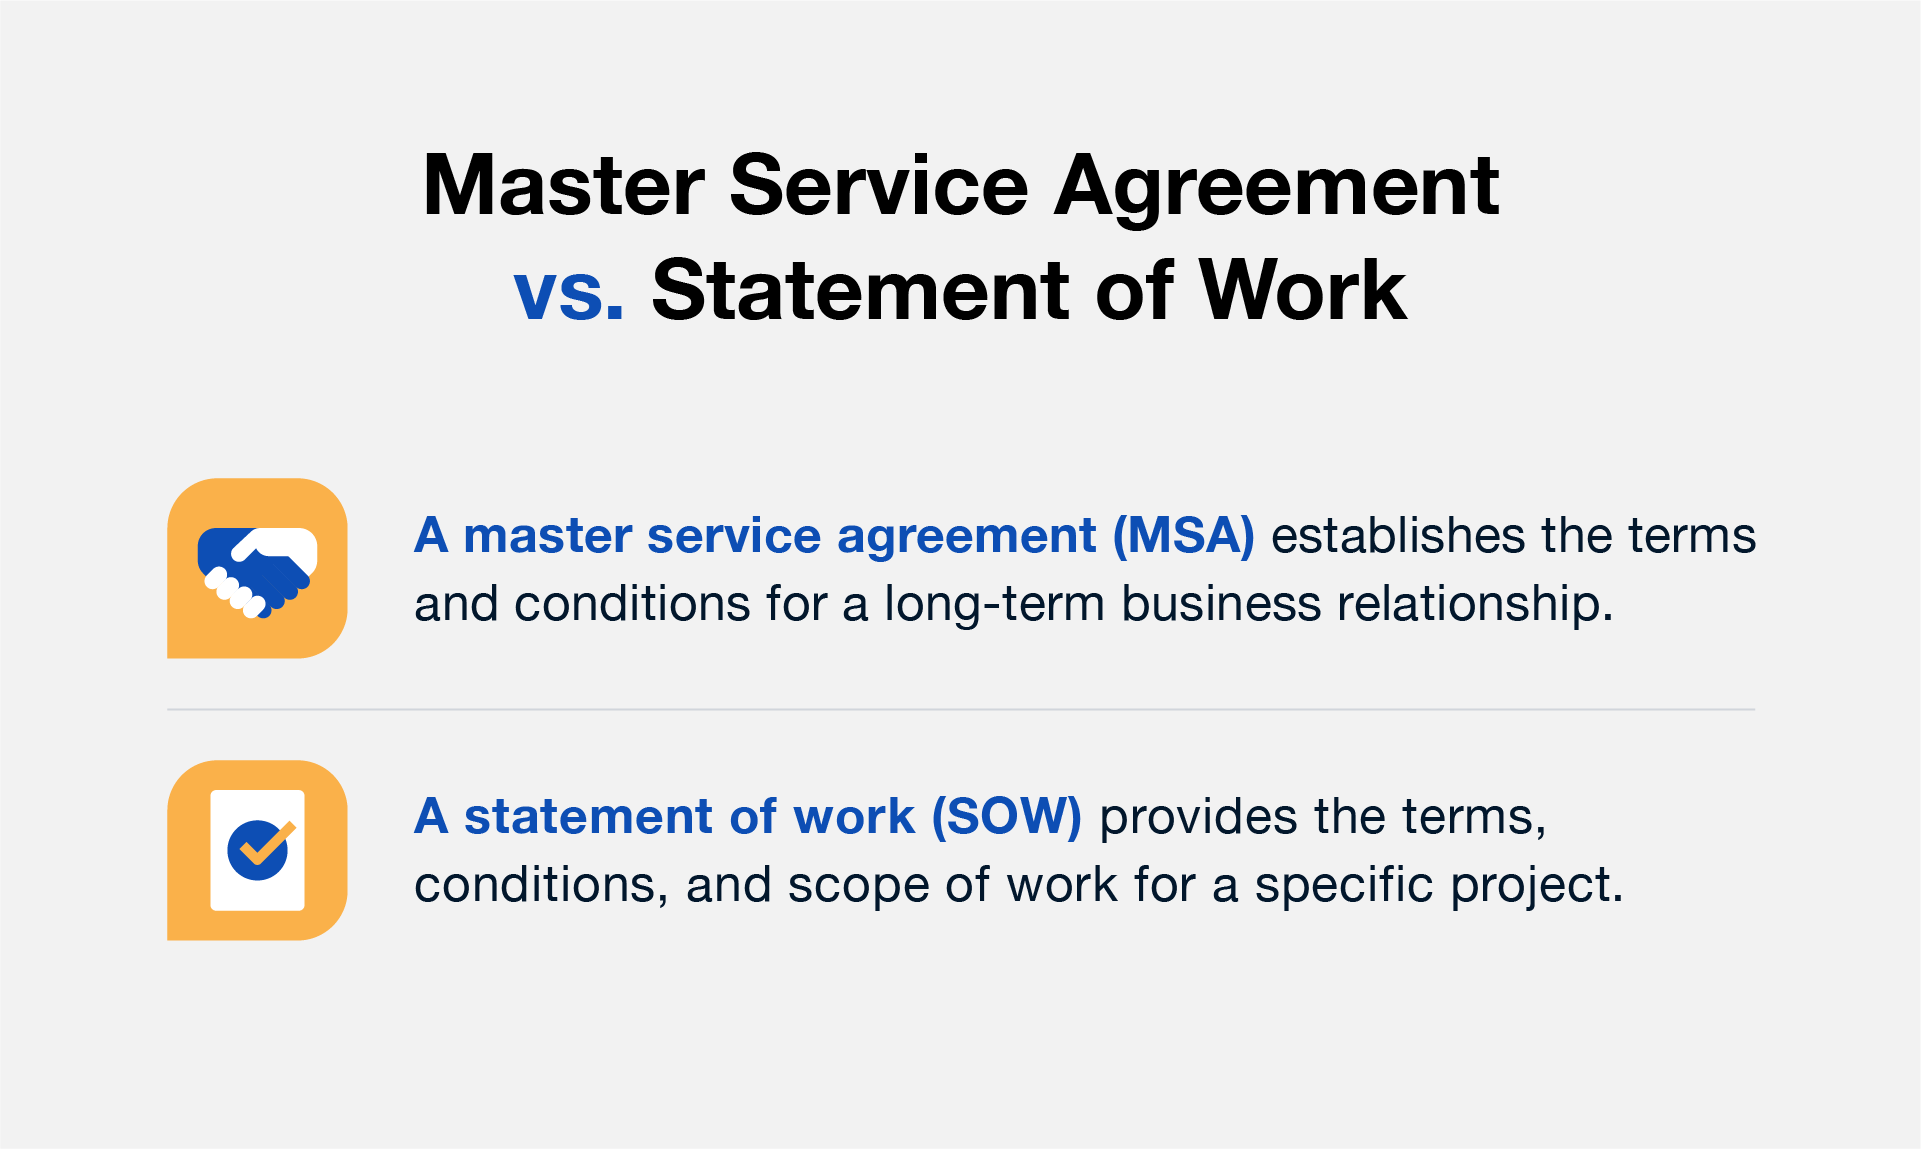 Difference between master service agreements and statements of work